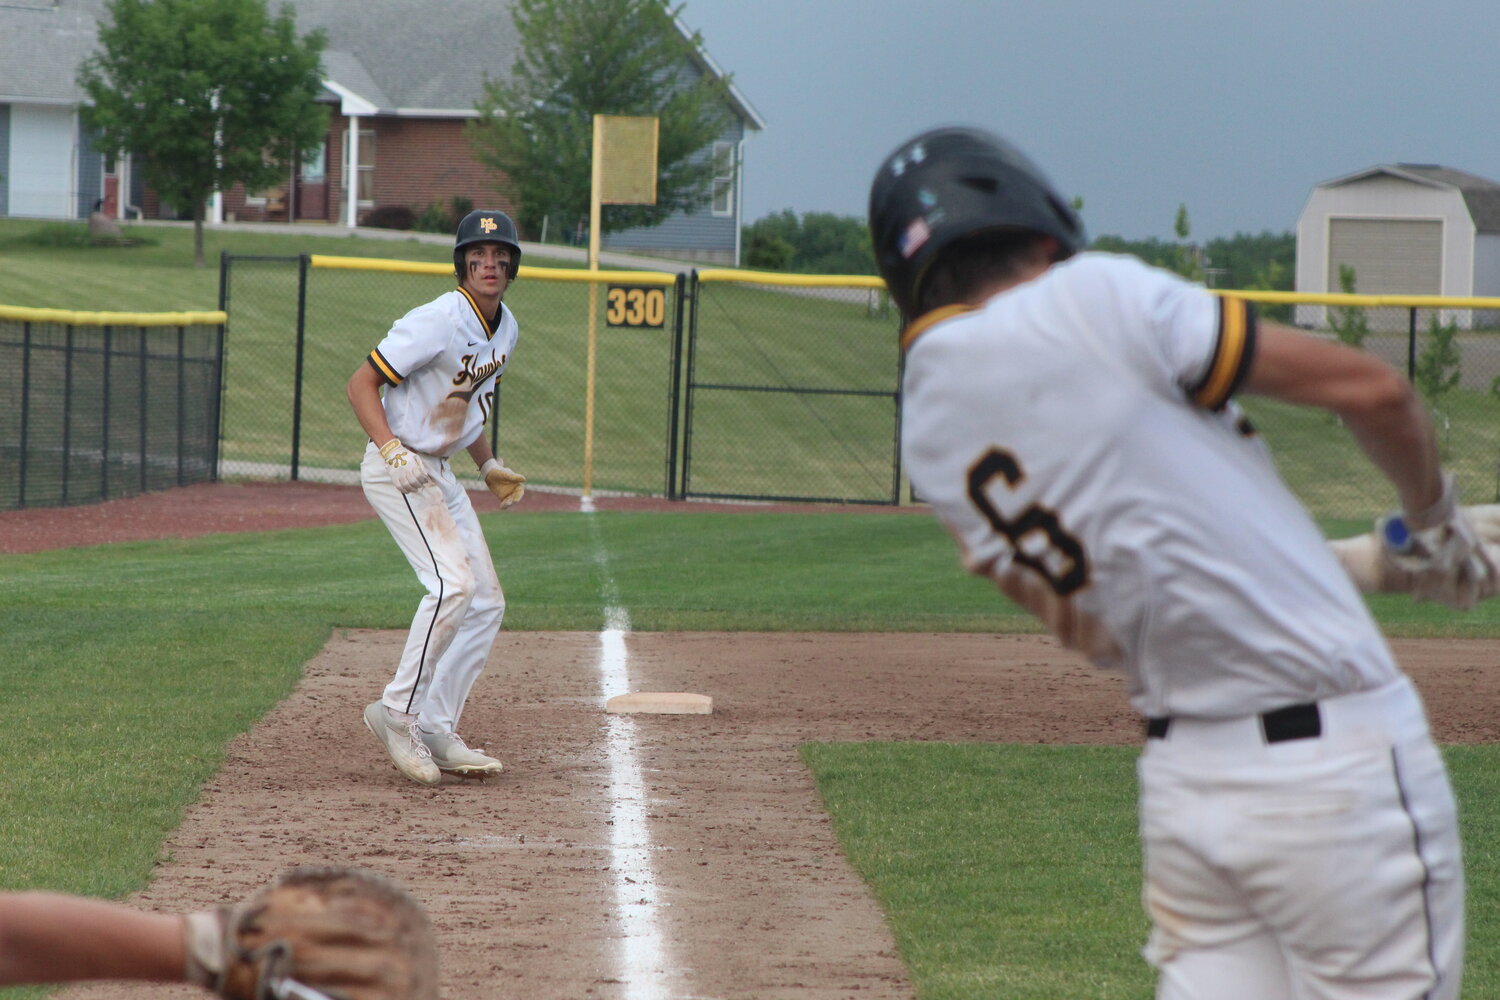 Collin Miller of Mid-Prairie dances off third base as teammate Cain Brown swings into a pitch against West Branch on June 2.